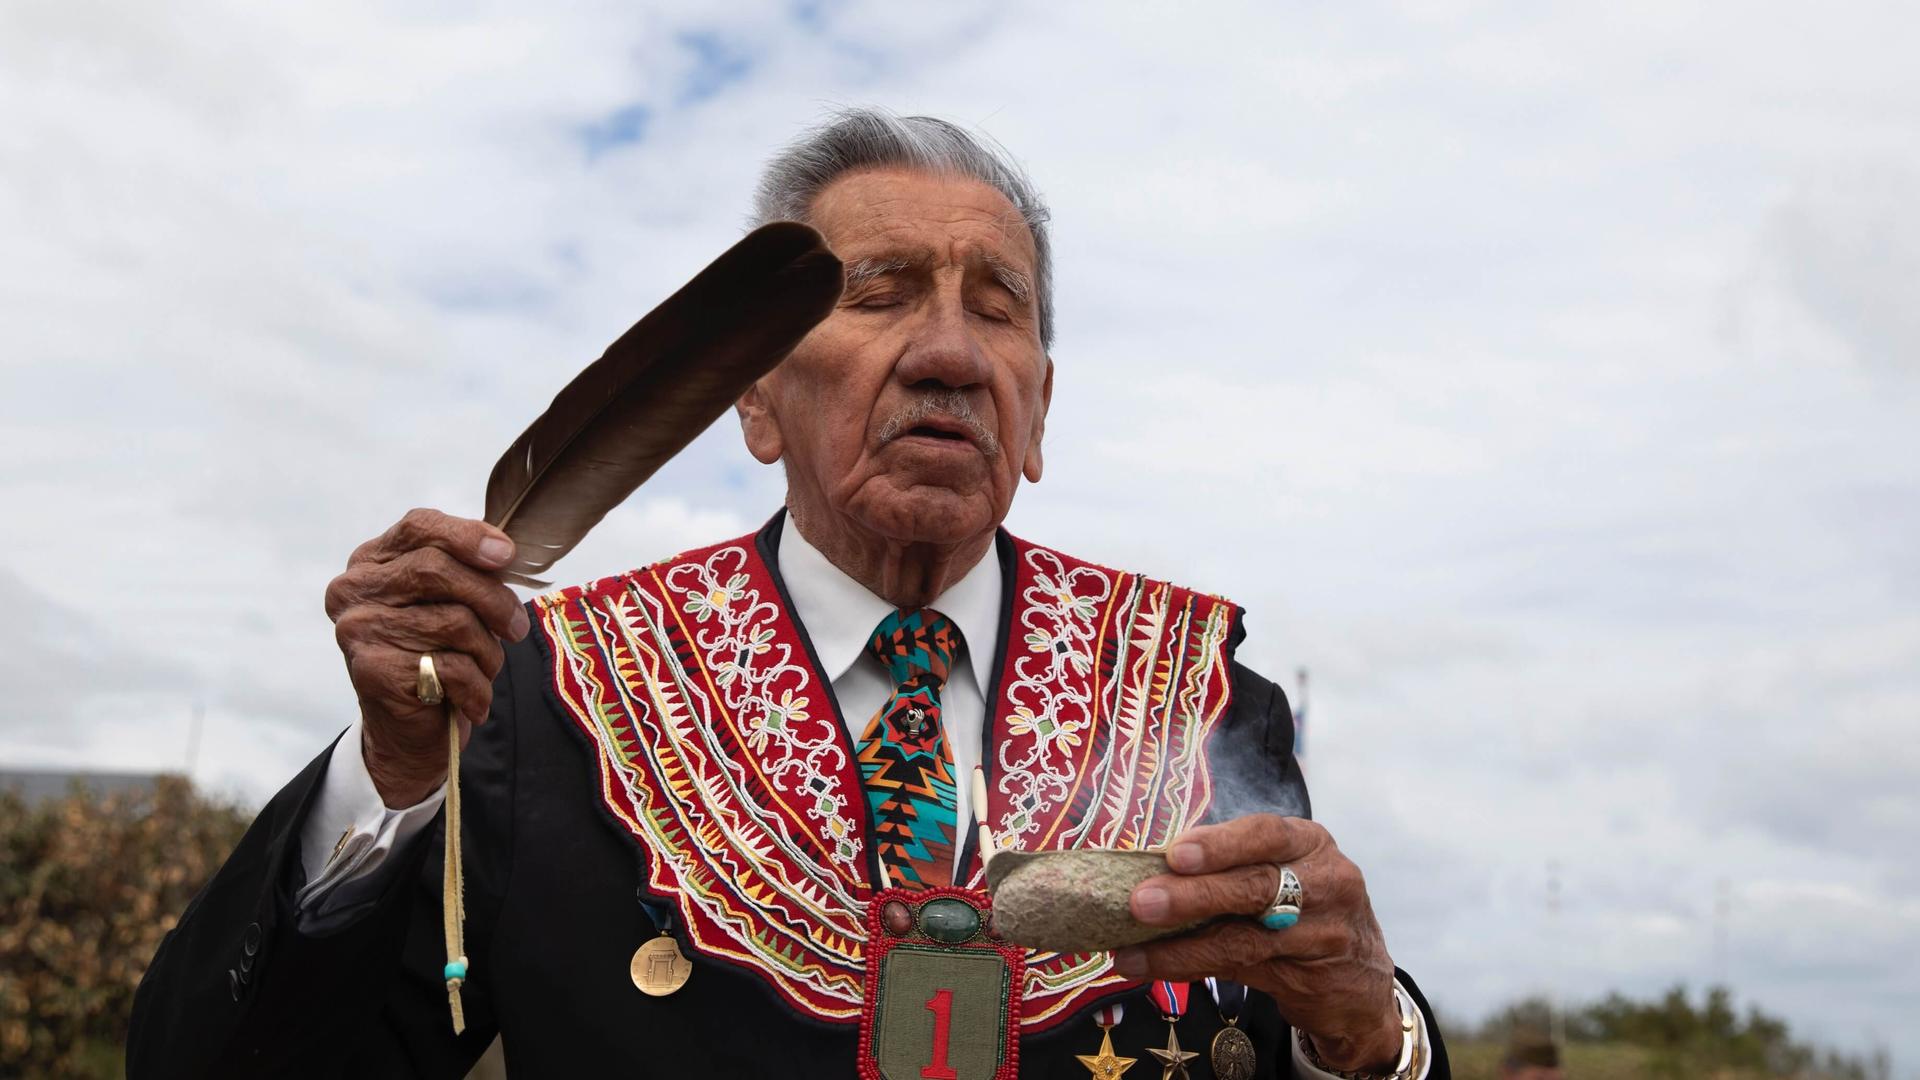 A Native American elder performs a ritual ceremony using a feather.